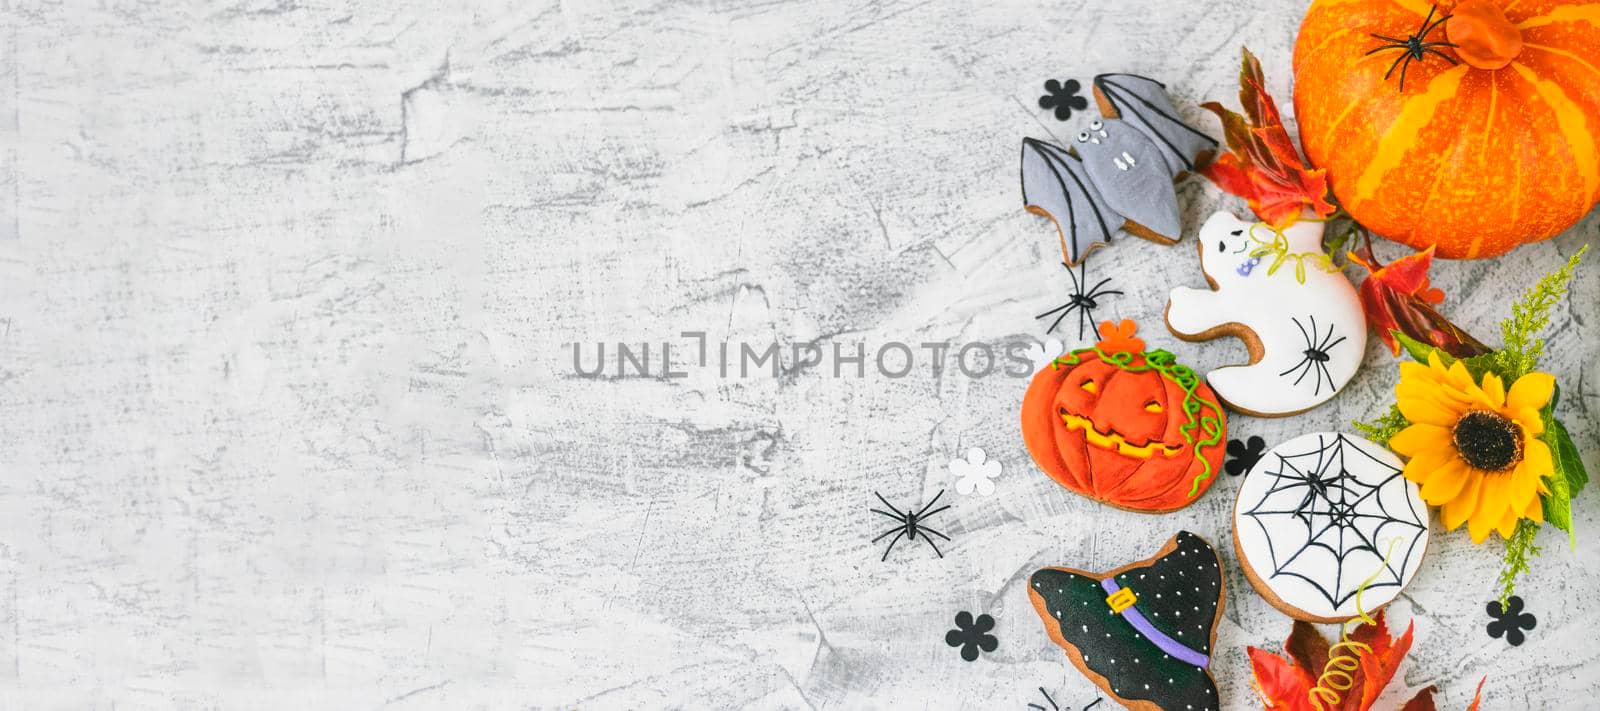 banner with Halloween background with cookies, leaves, sunflower and spiders, top view. Halloween objects on textured concrete with space for text. Vintage background Halloween celebration. by Leoschka